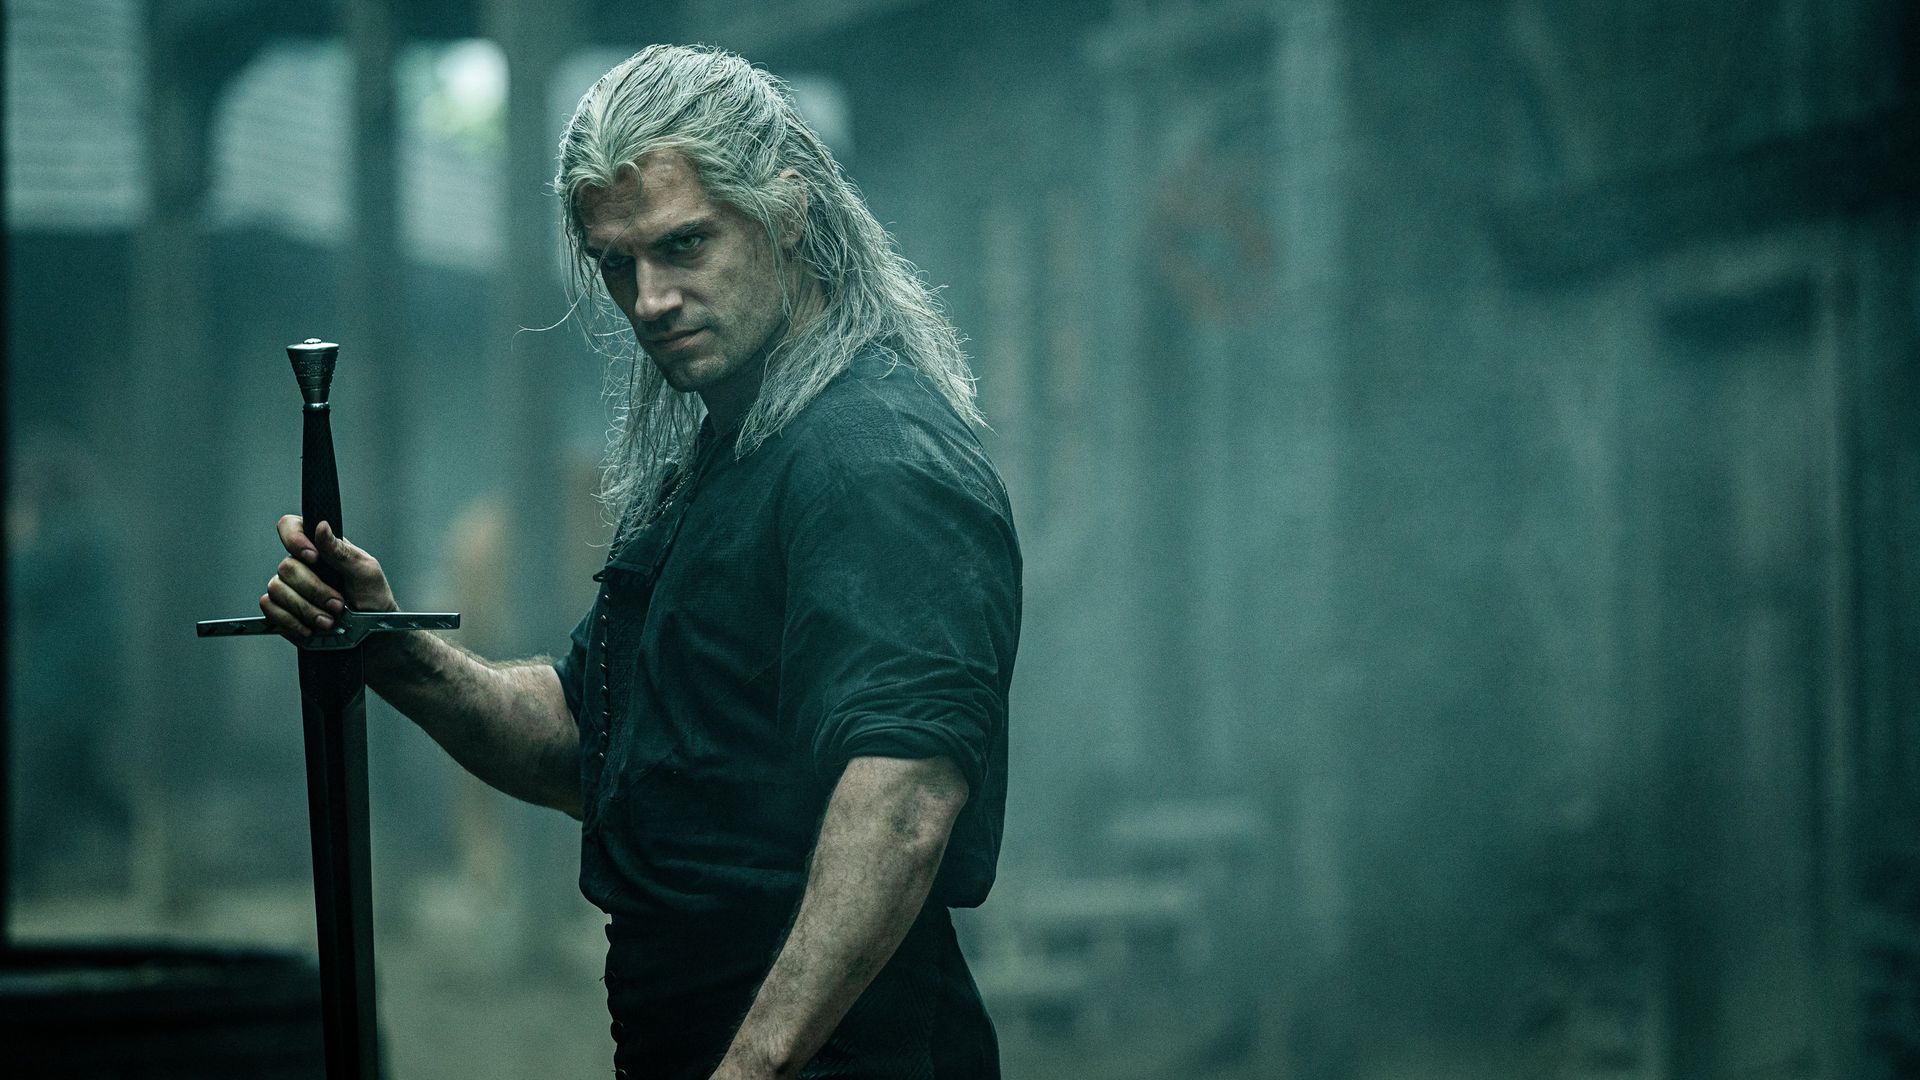 A man with long white hair holds a sword while looking toward the camera